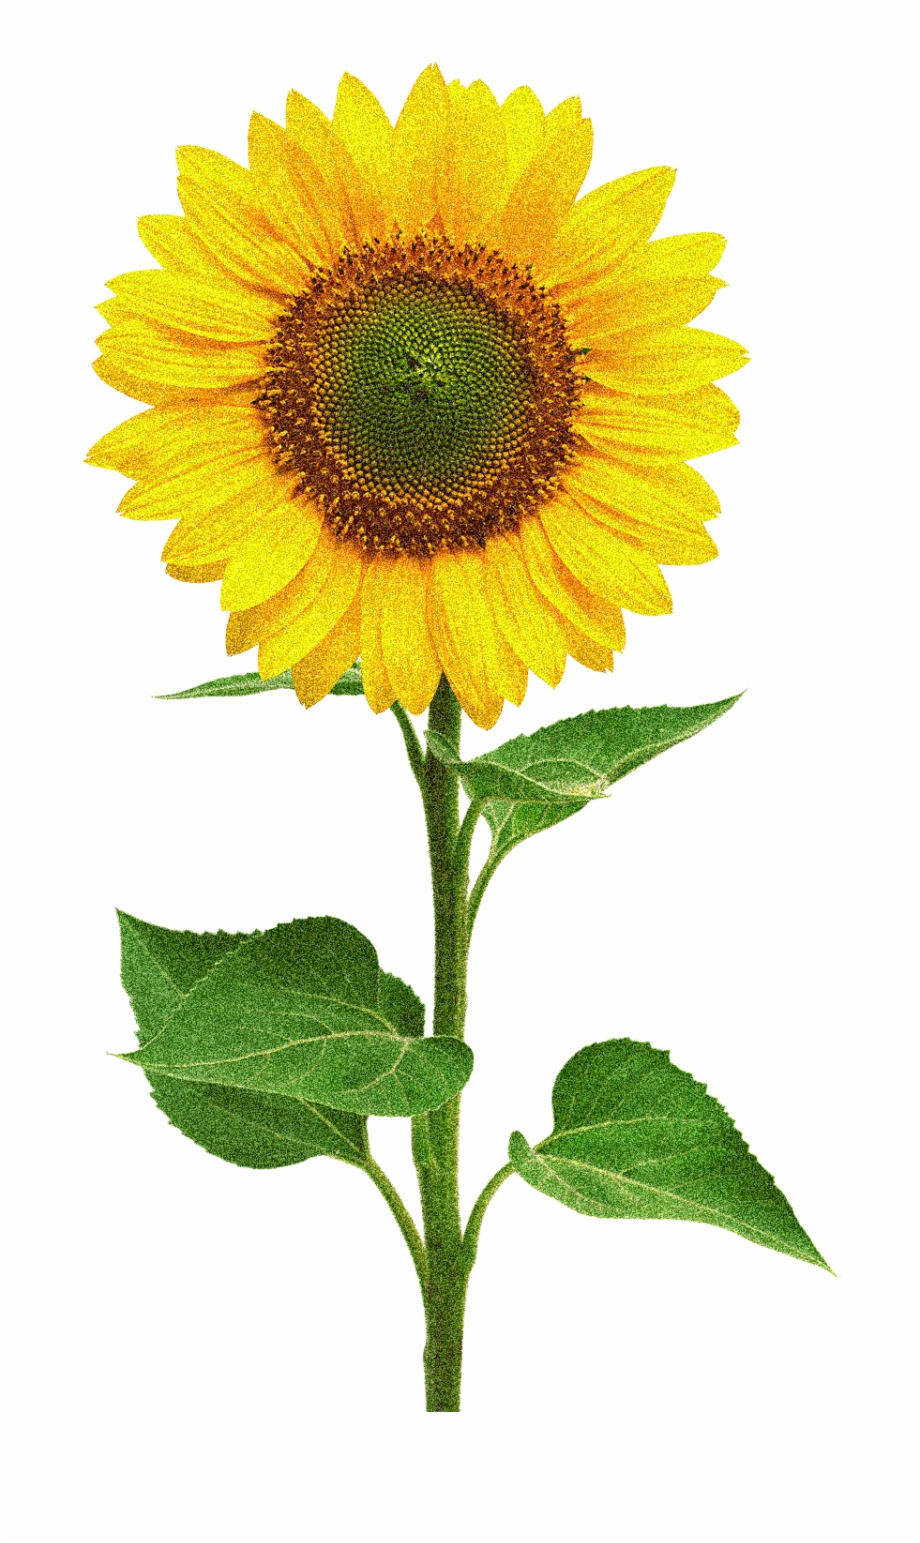 Image Flower Meaning Of Sunflower